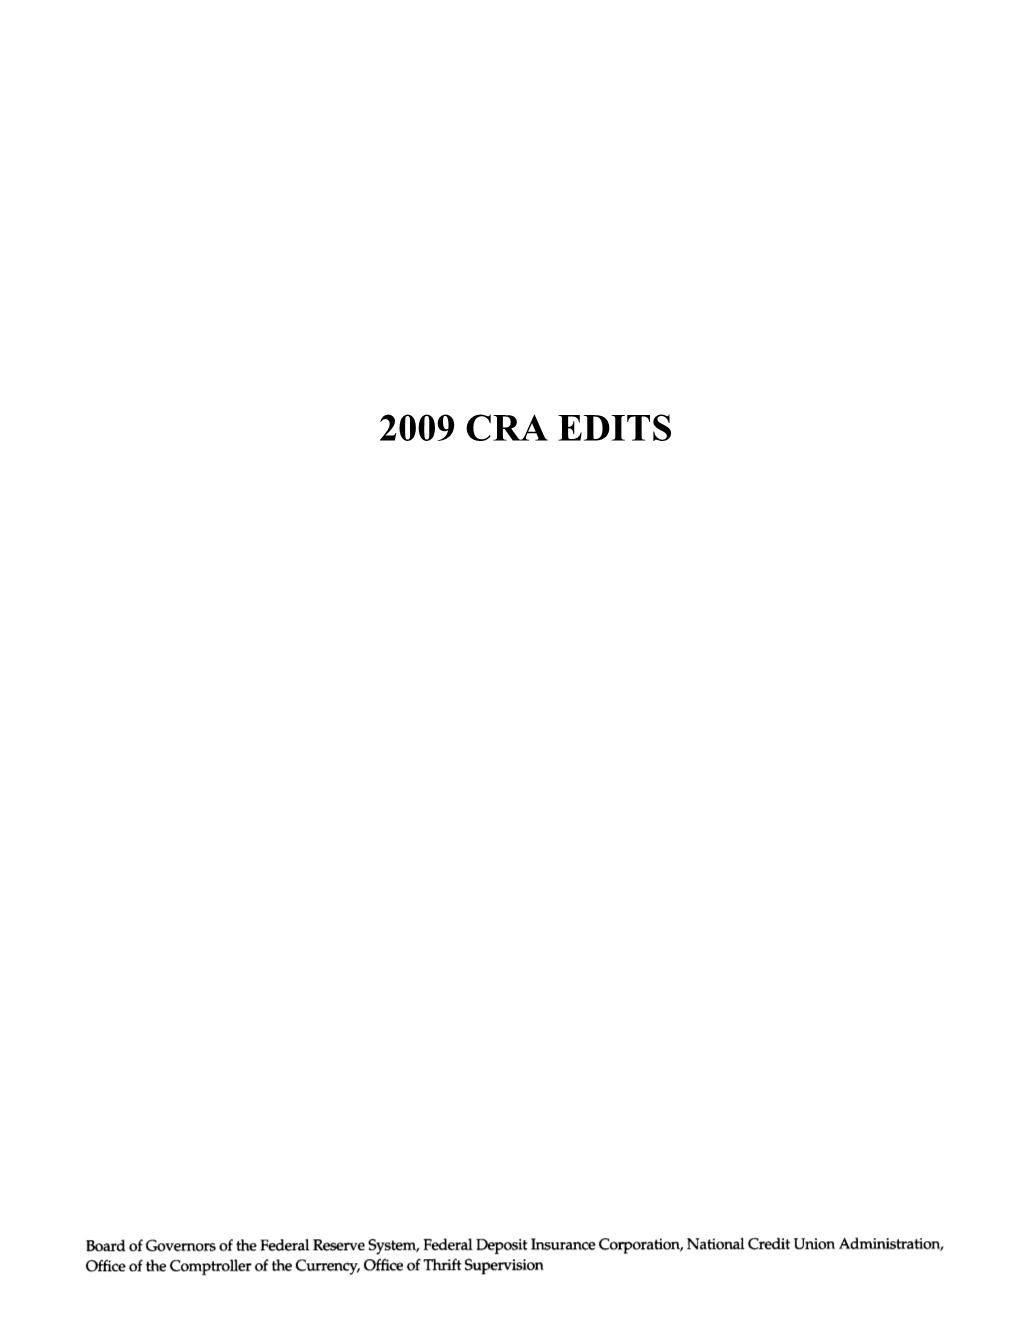 CRA Edits Are Divided Into Three Edit Types: Syntactical, Validity and Quality. Each Type